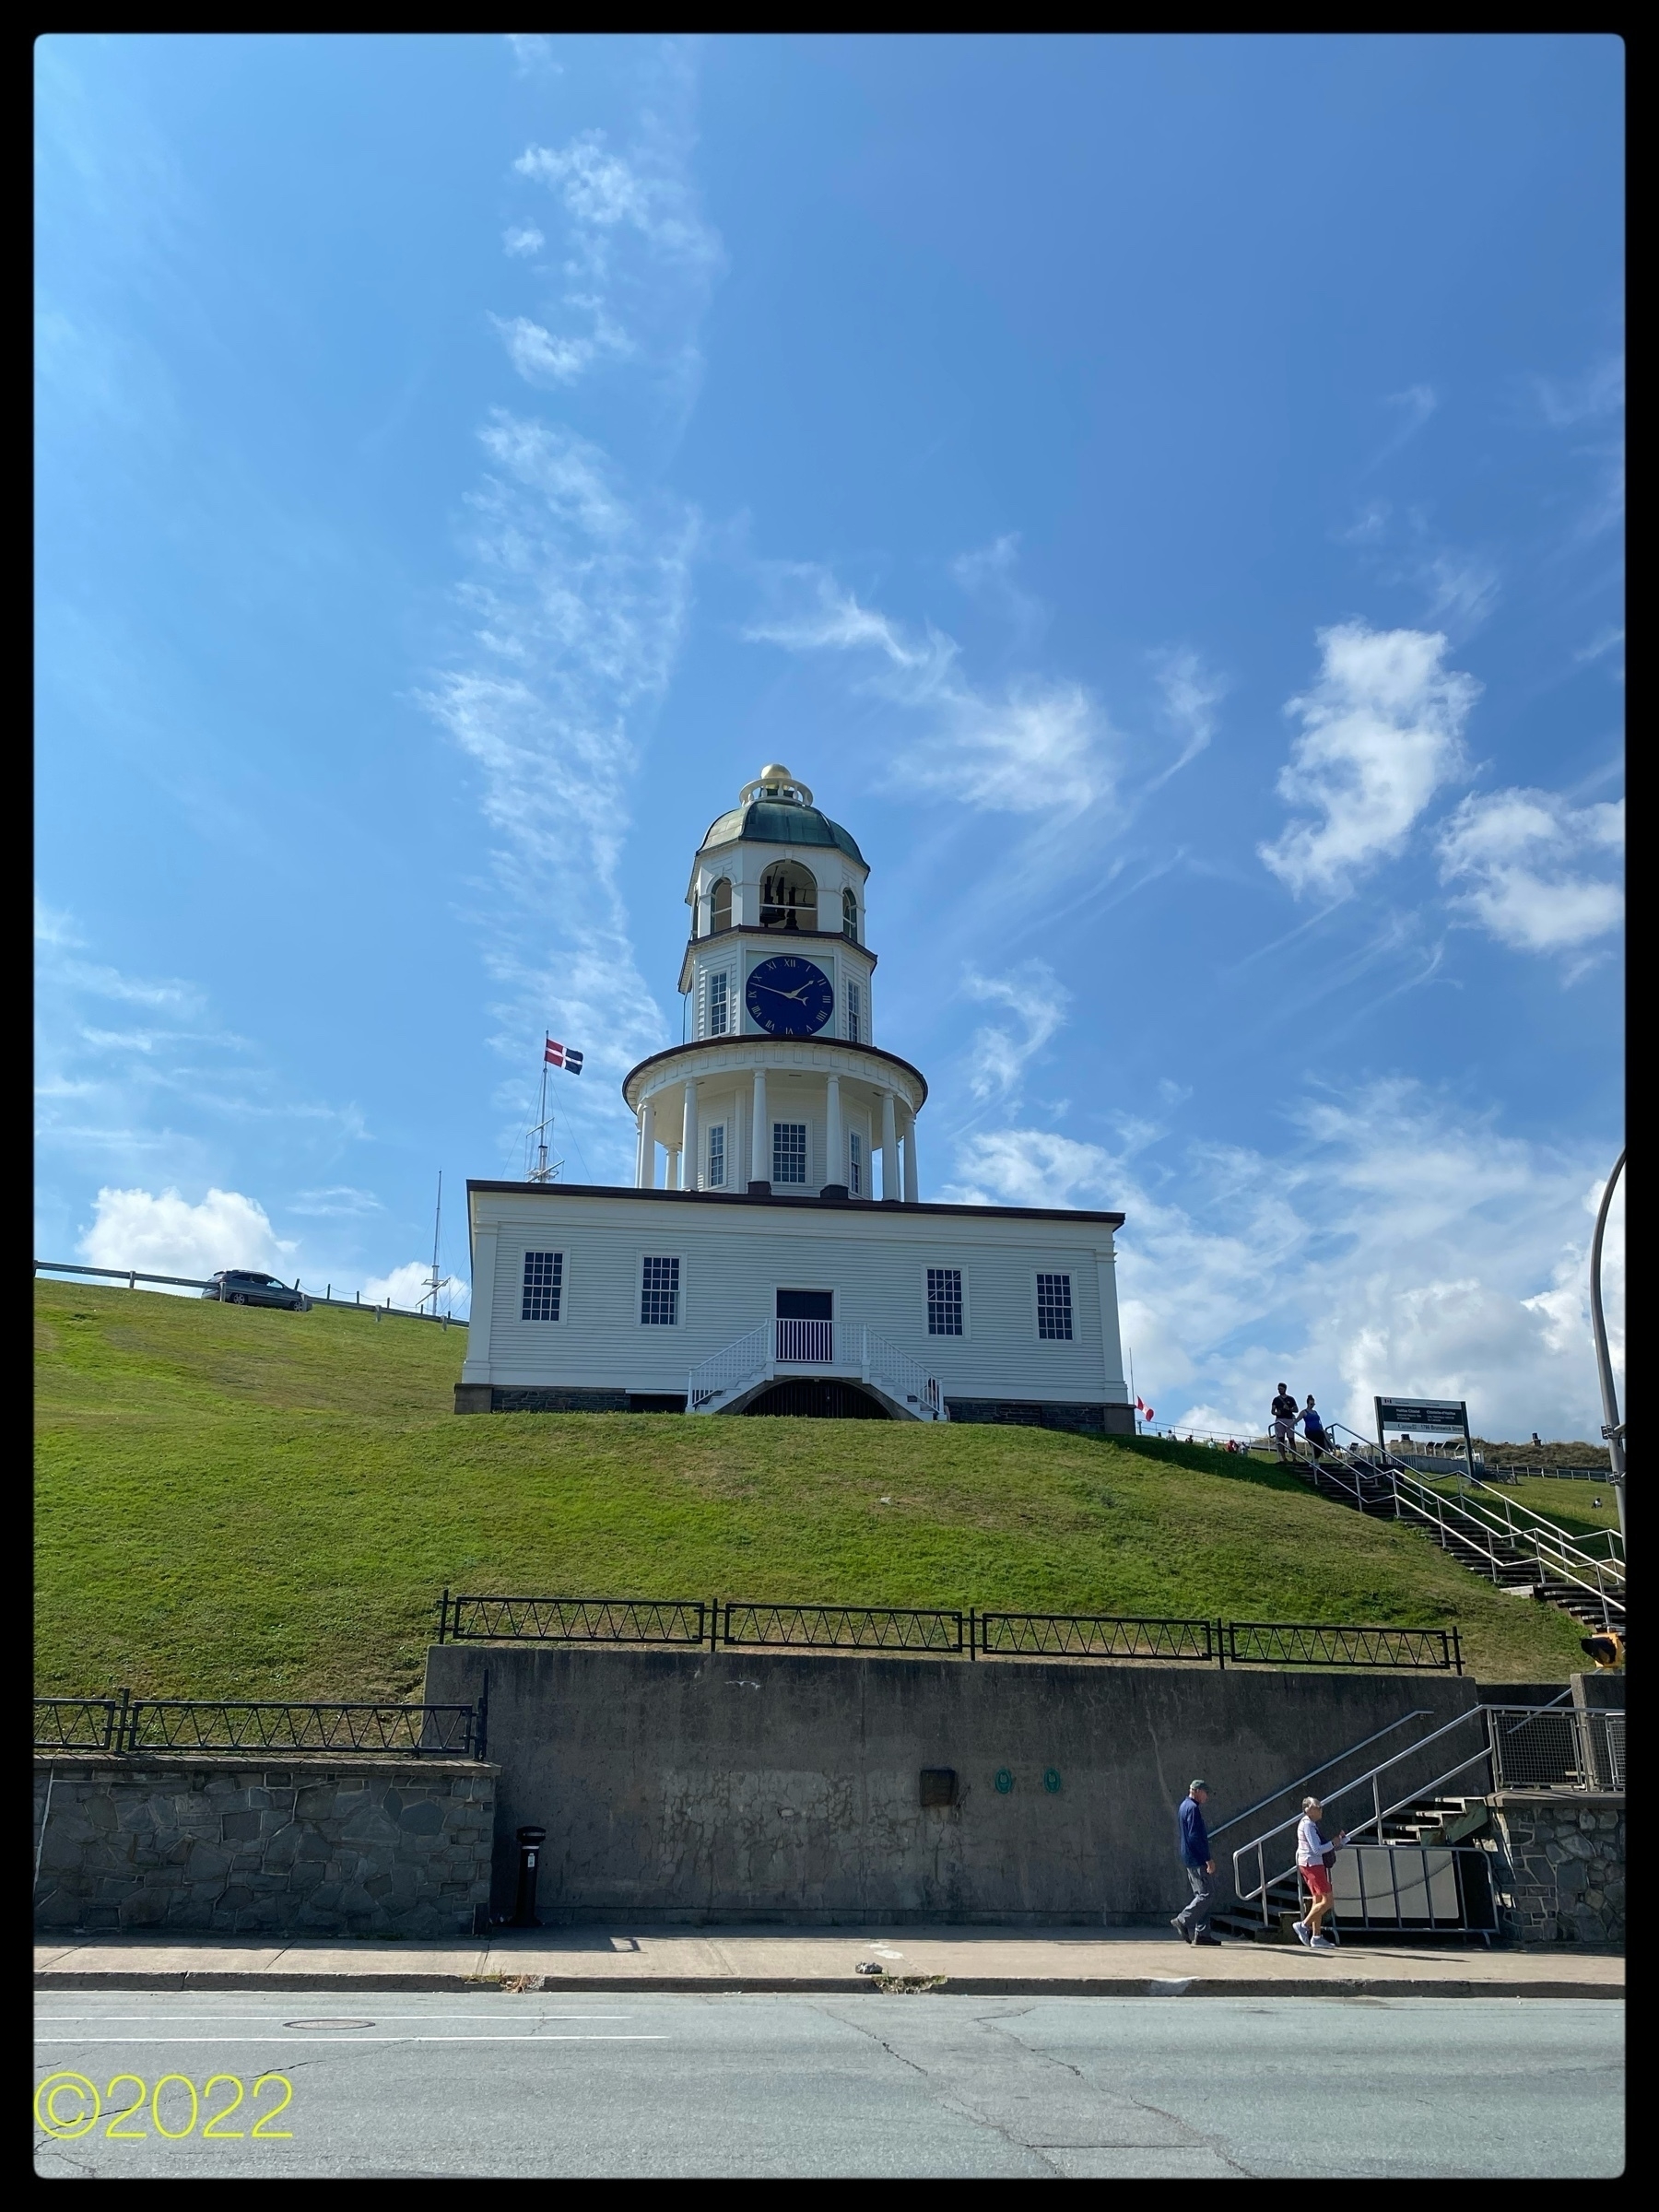 Looking up Citadel Hill at the Old Town Clock in Halifax NS